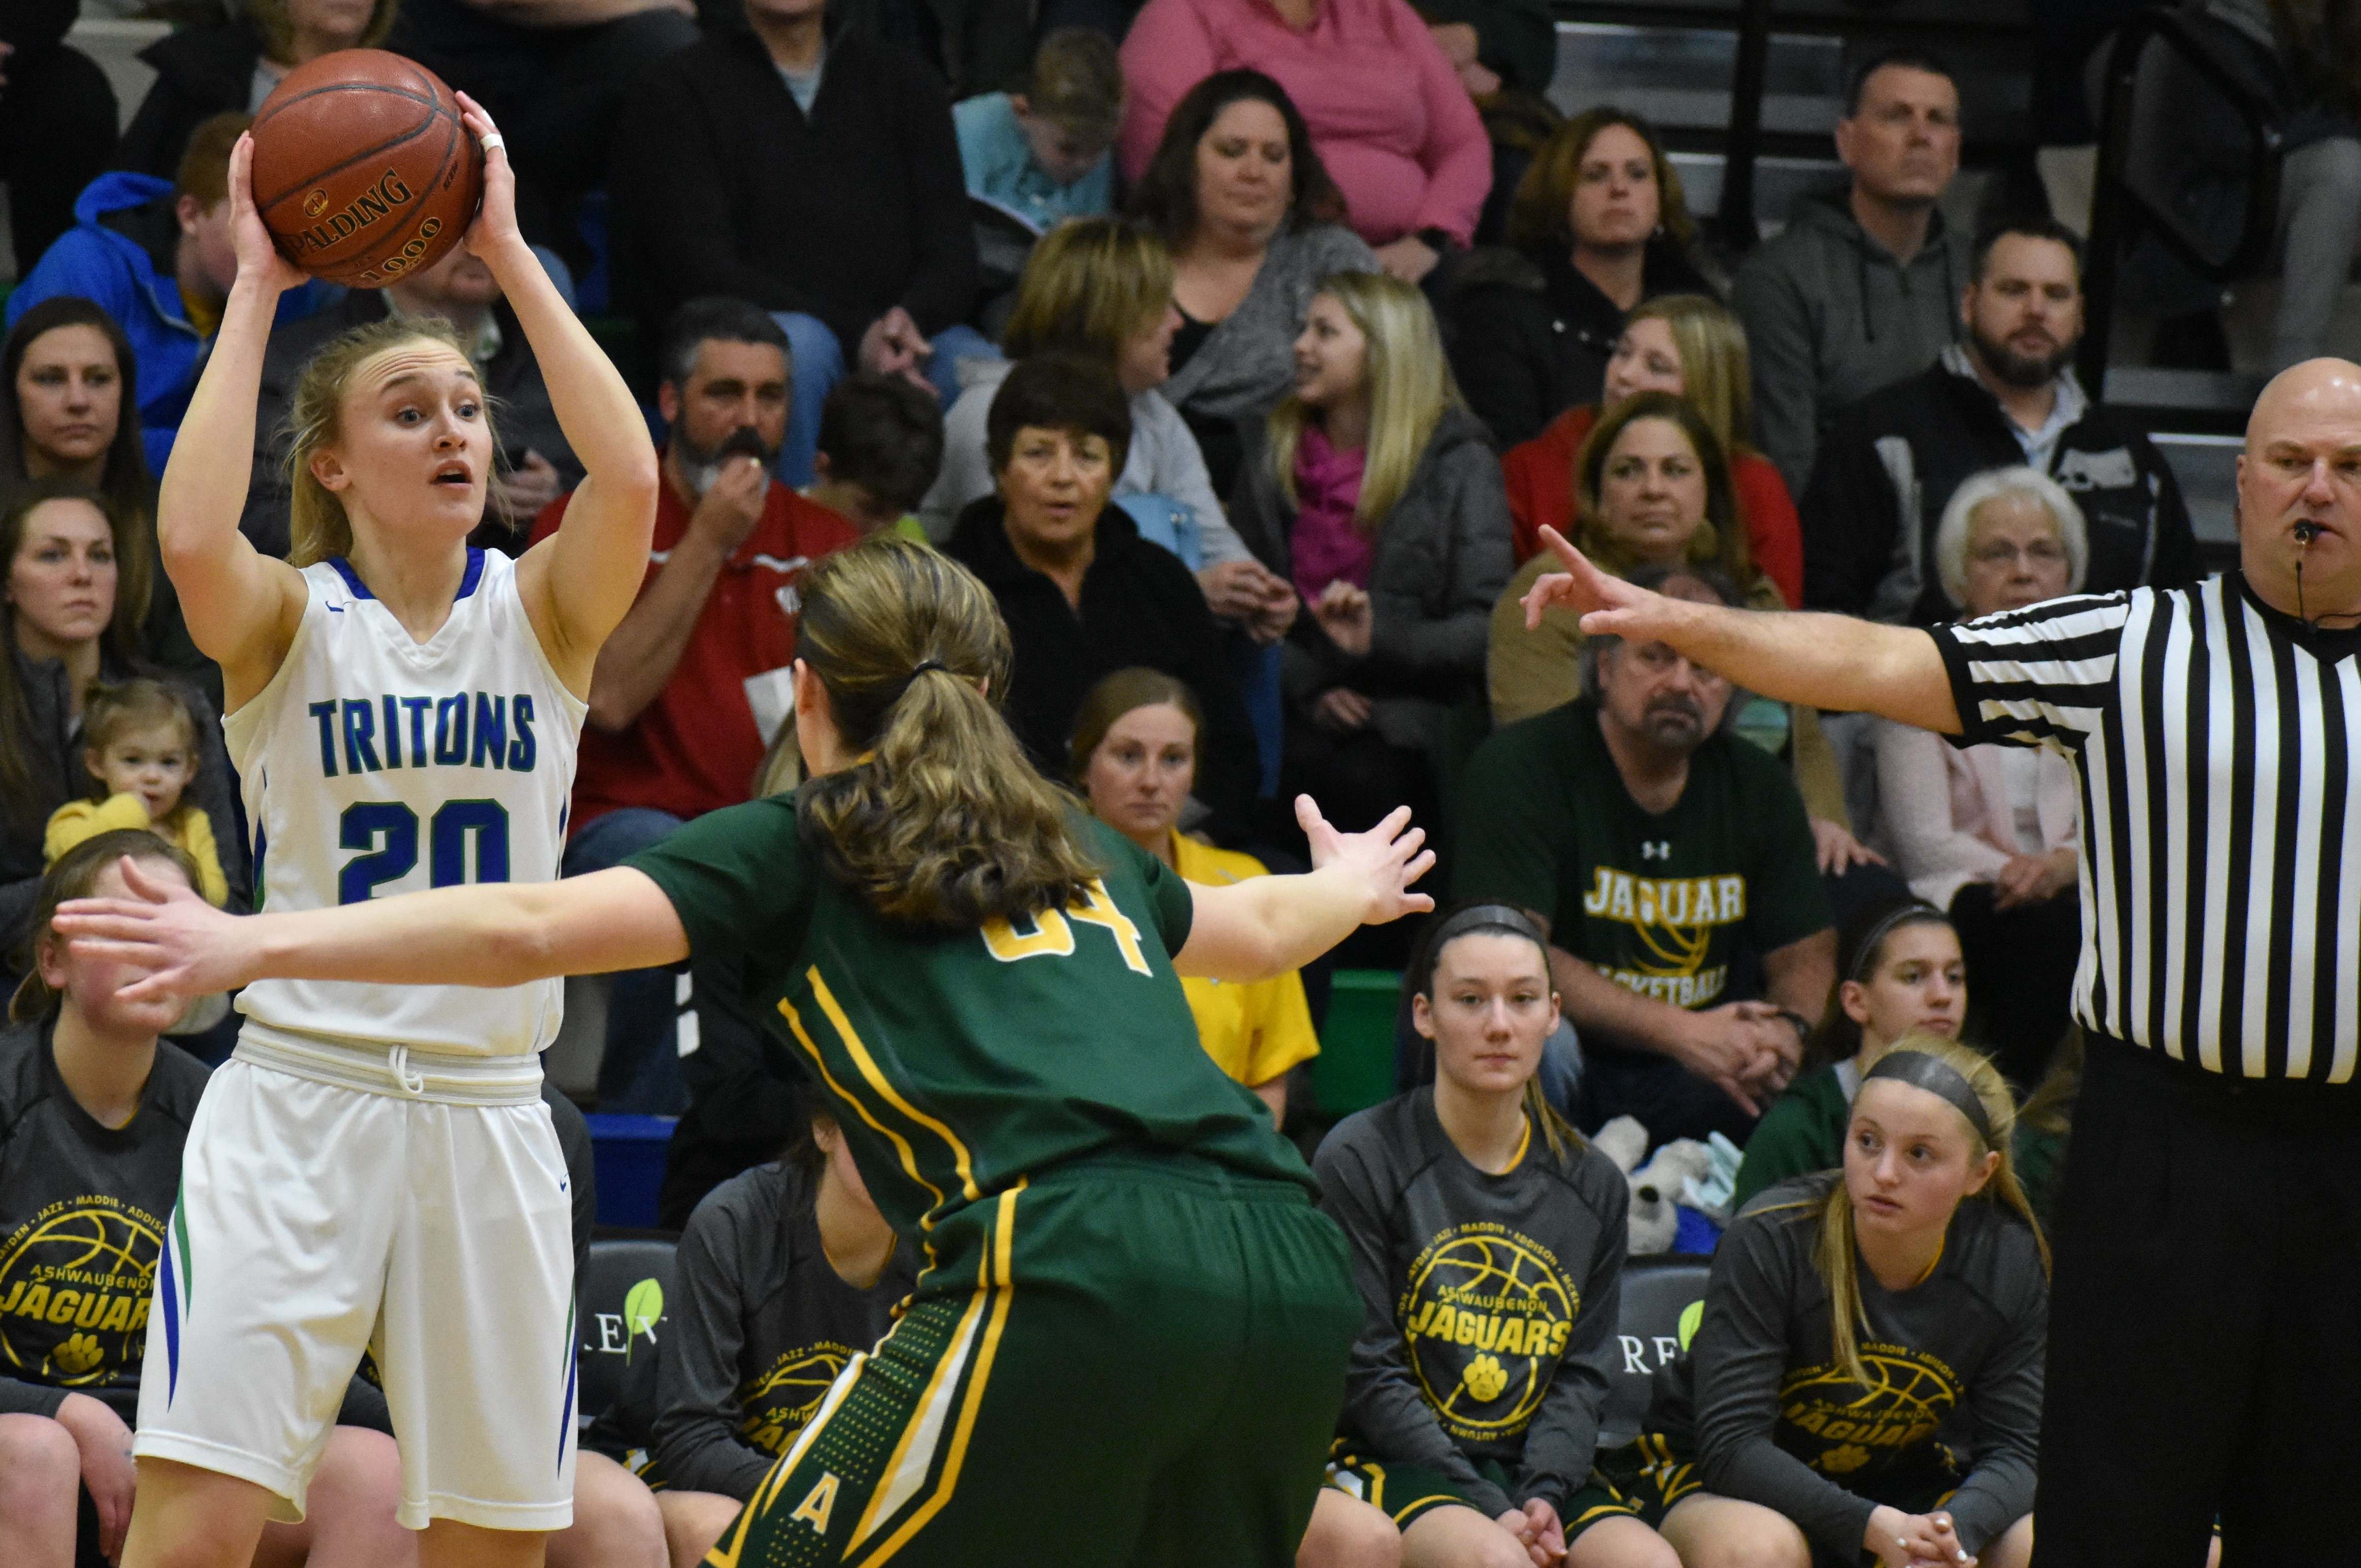 Schlader hits bonus free throws to lift Jaguars over Tritons